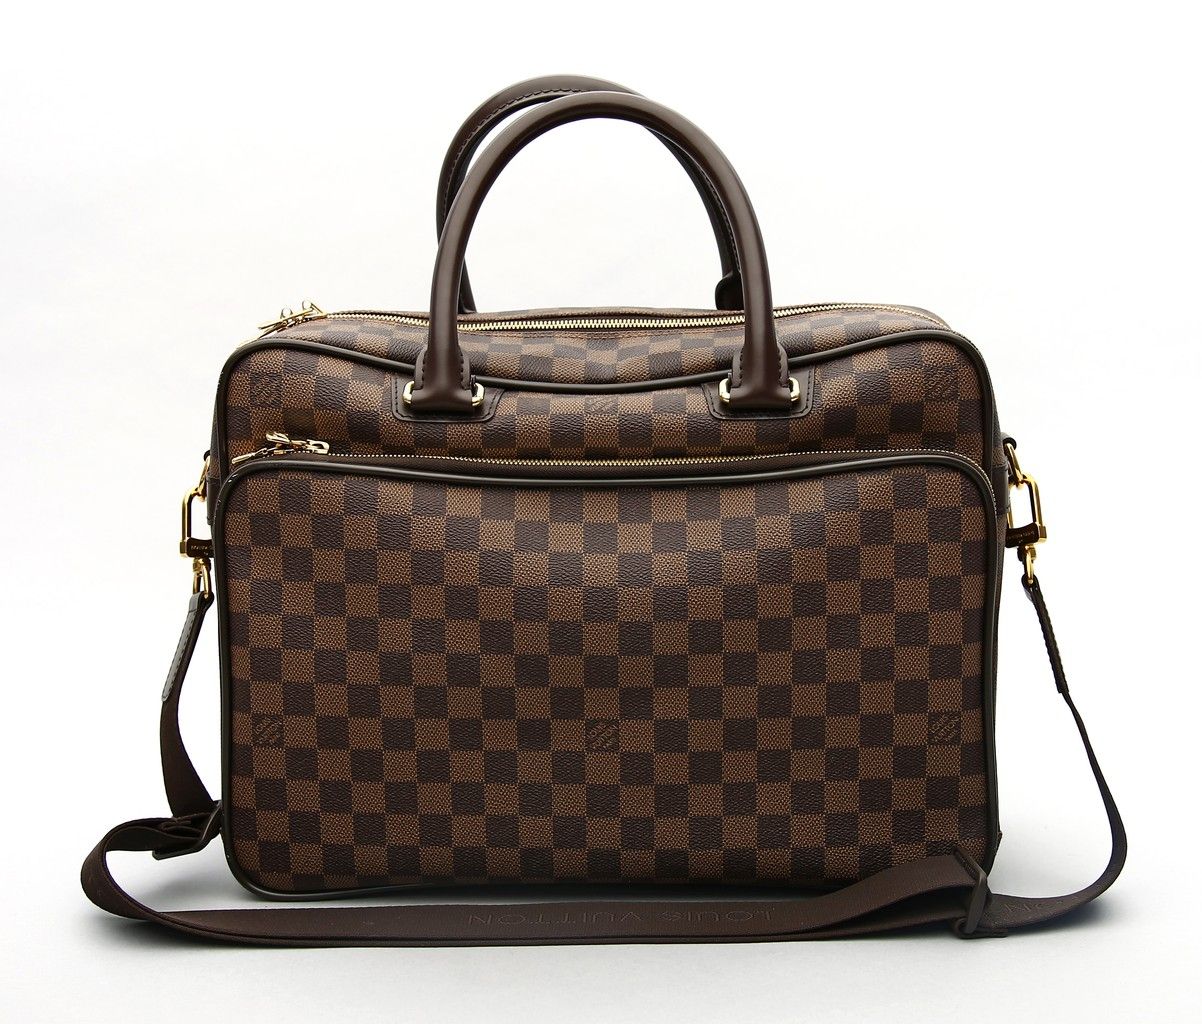 Tasche "Icare", Louis Vuitton. Damier canvas, brown leather and gold hardware. T&hellip;